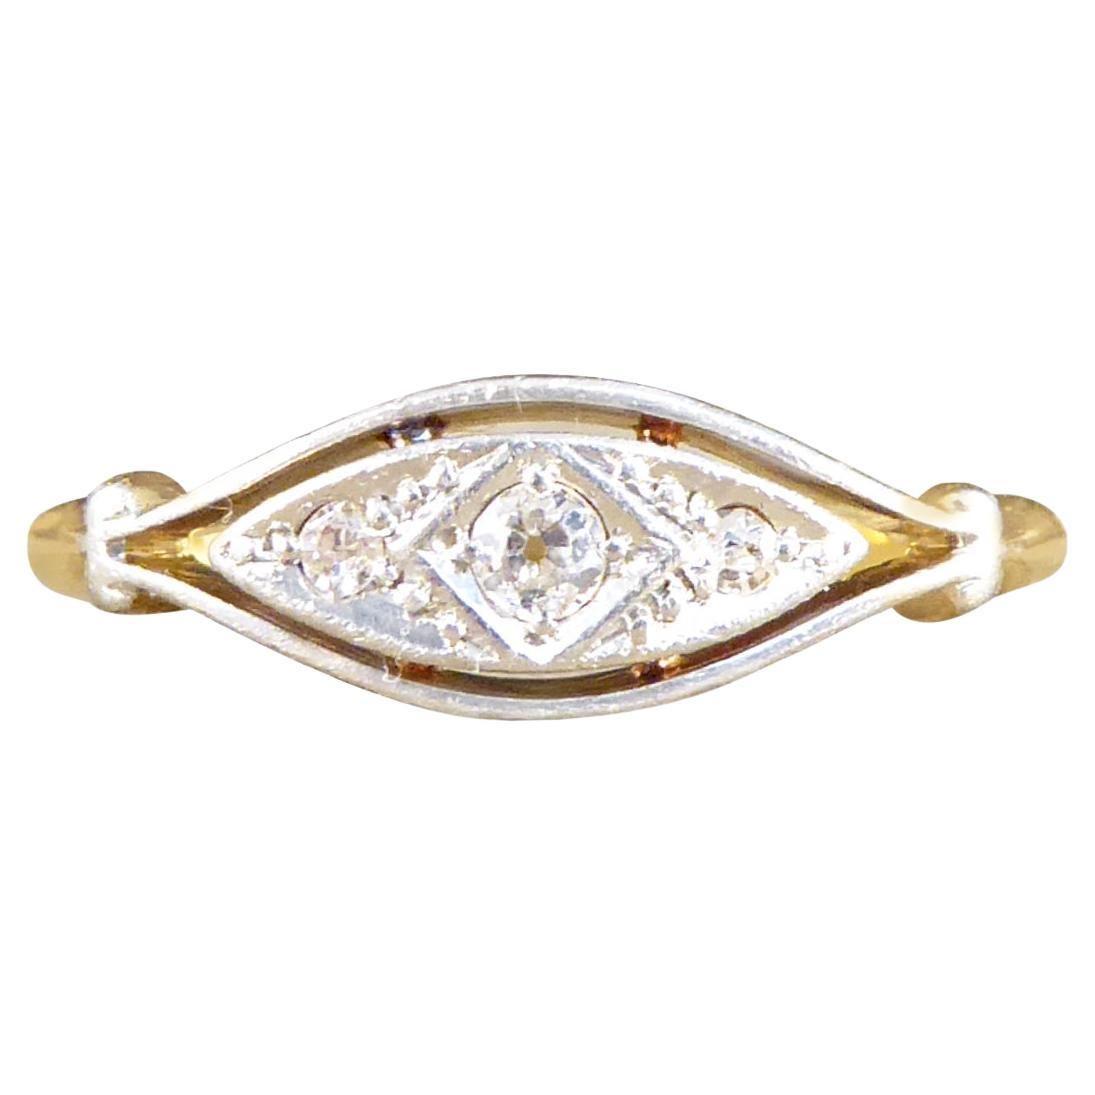 Early 20th Century Diamond Set Ring in 18 Carat Yellow and White Gold